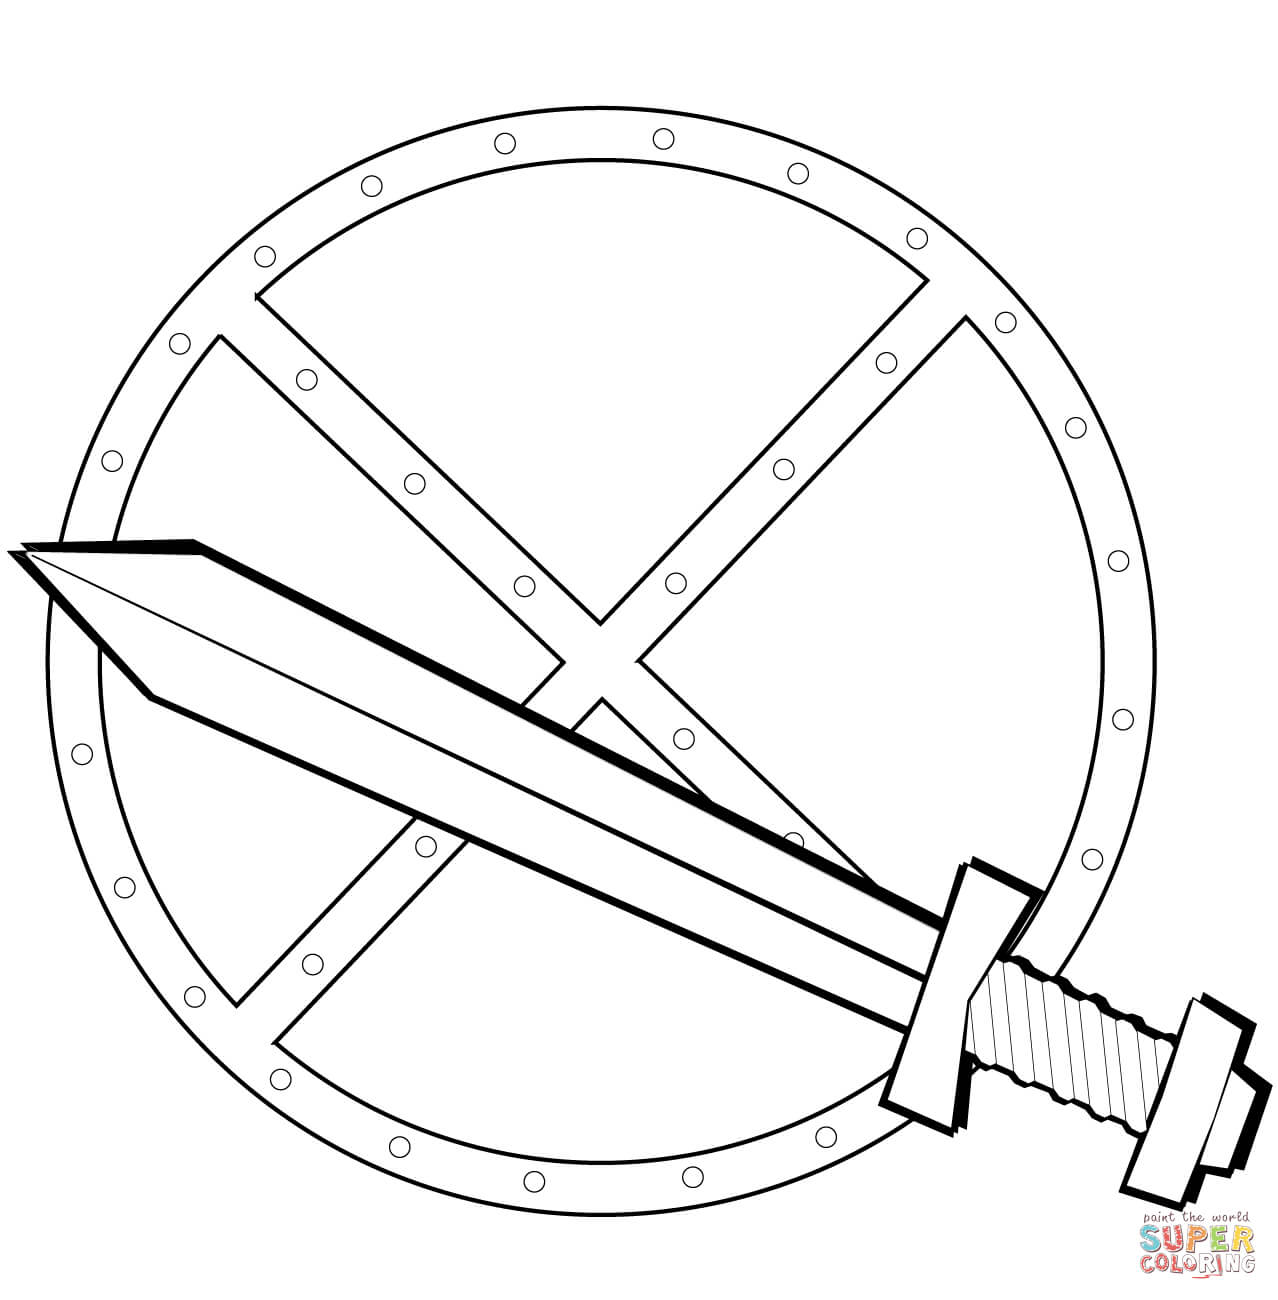 Sword and shield coloring page free printable coloring pages